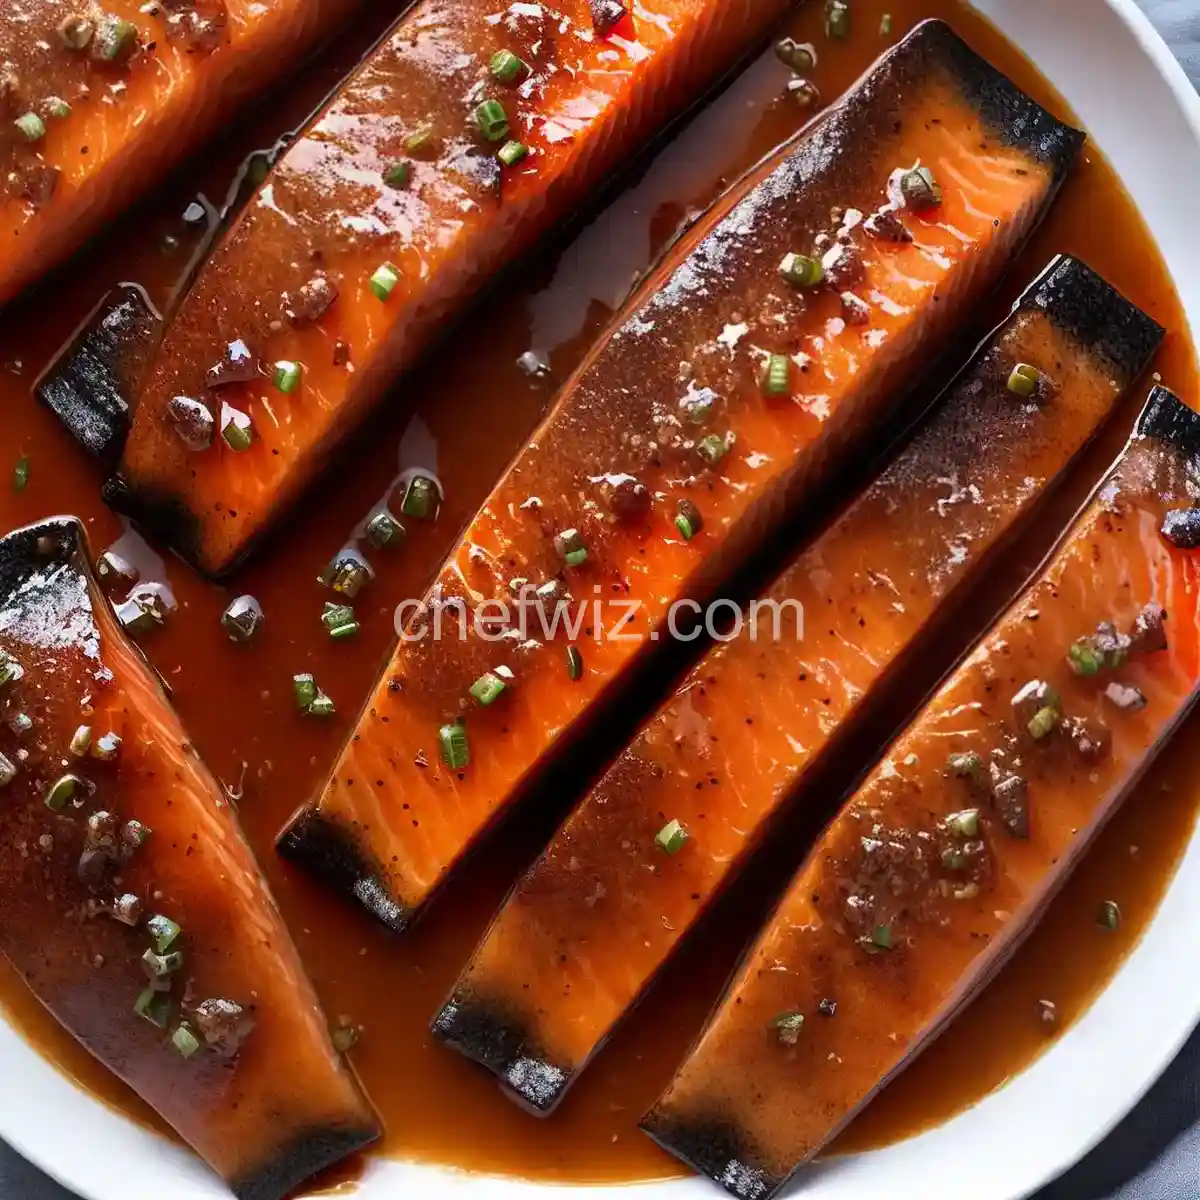 Candied Salmon - Recipes. Food. Cooking. Eating. Dinner ideas ...